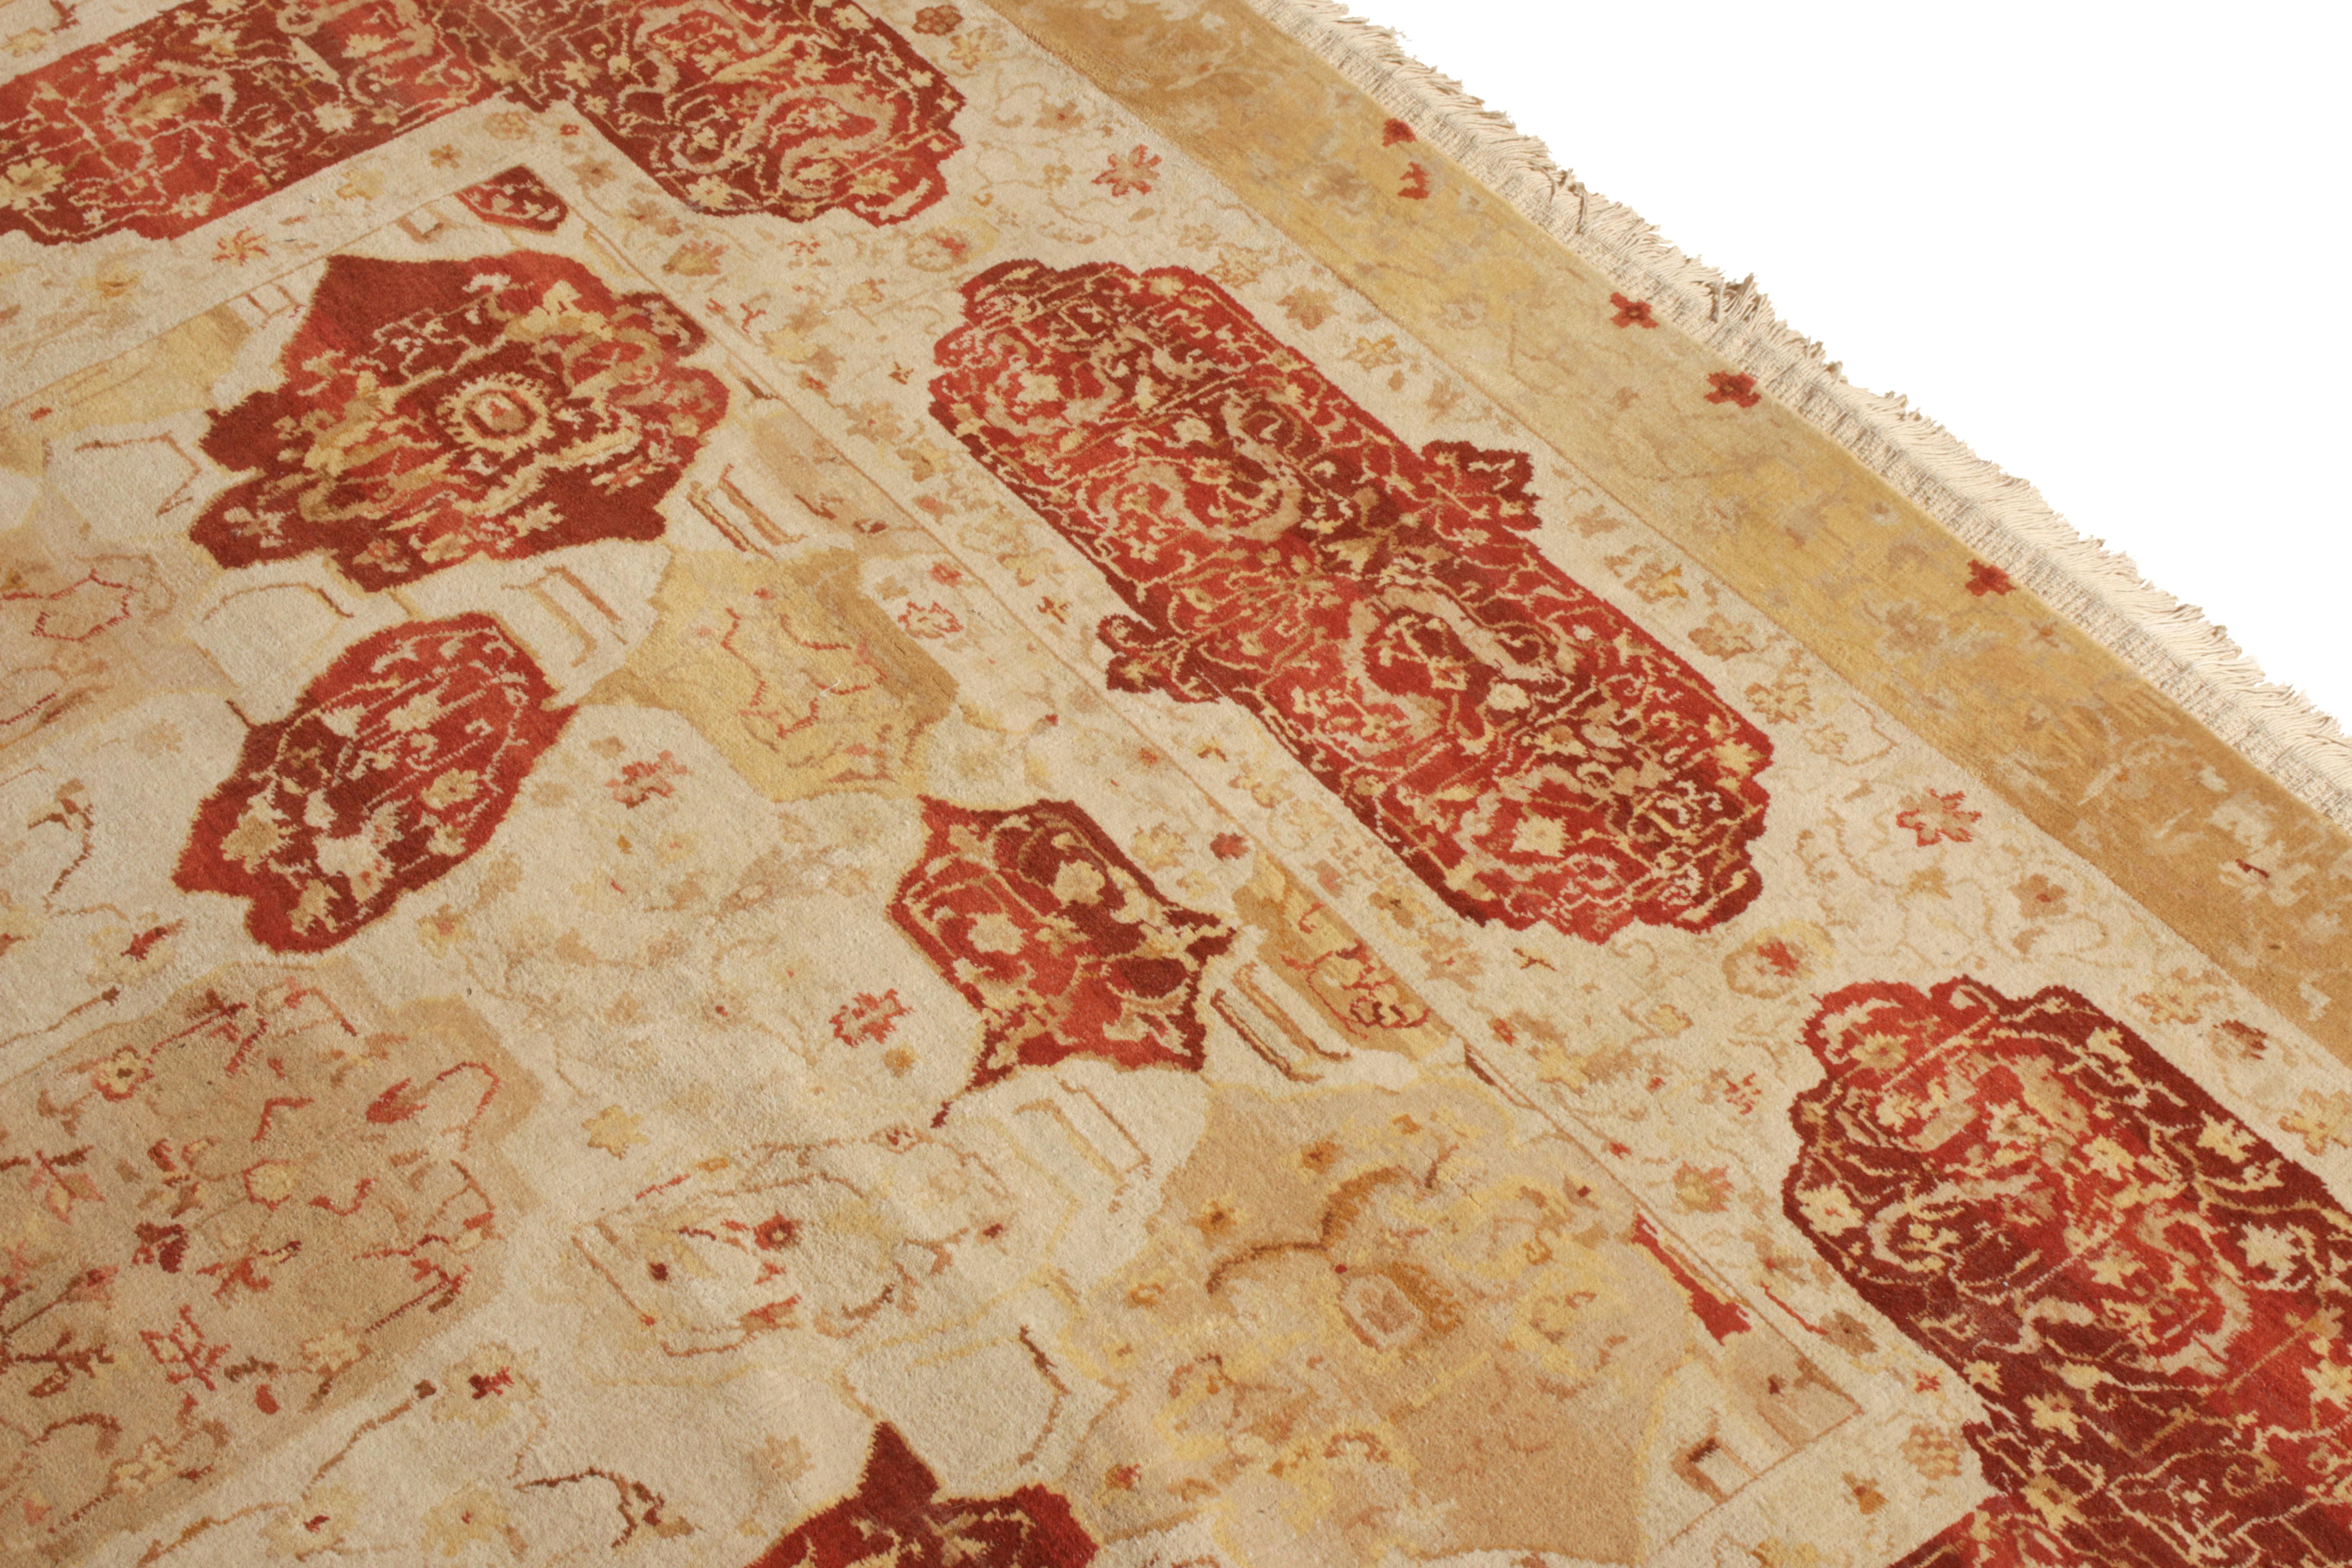 Chinese Rug & Kilim’s Classic Agra style rug in Beige-Brown and Red Floral Cartouches For Sale